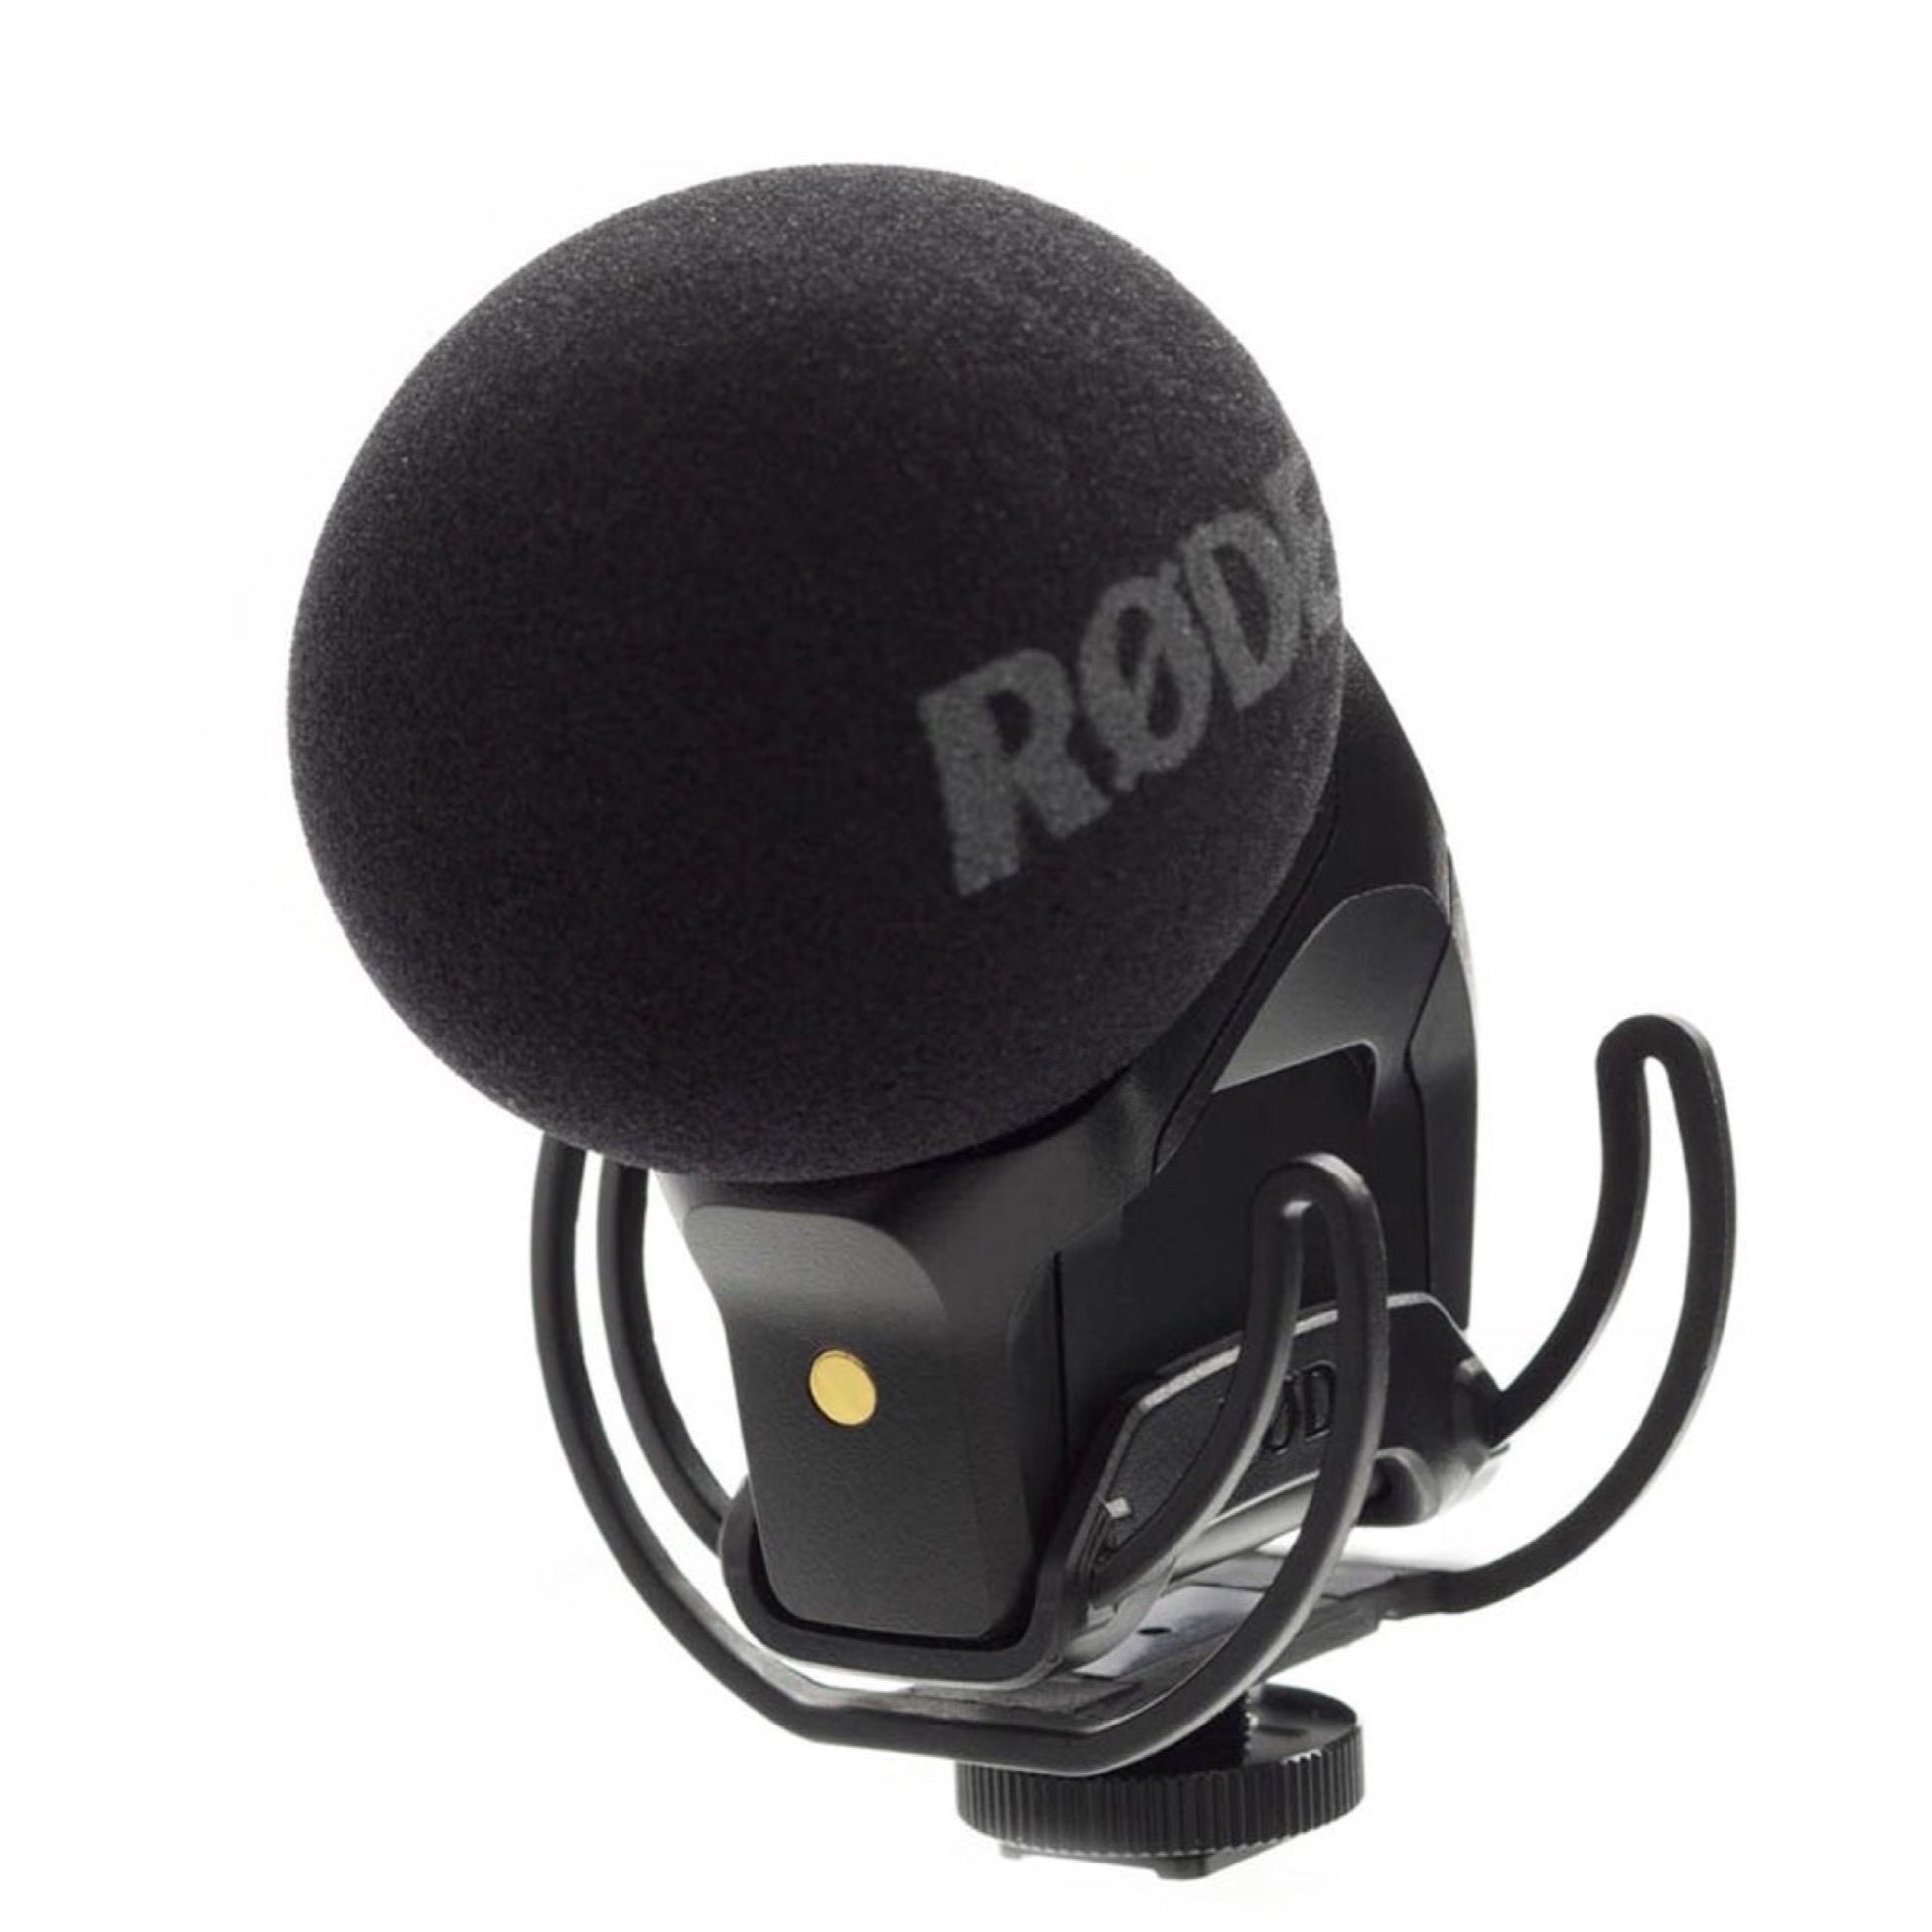 Rode SVMPR Stereo VideoMic Pro Condenser Microphone with Rycote Shockmount